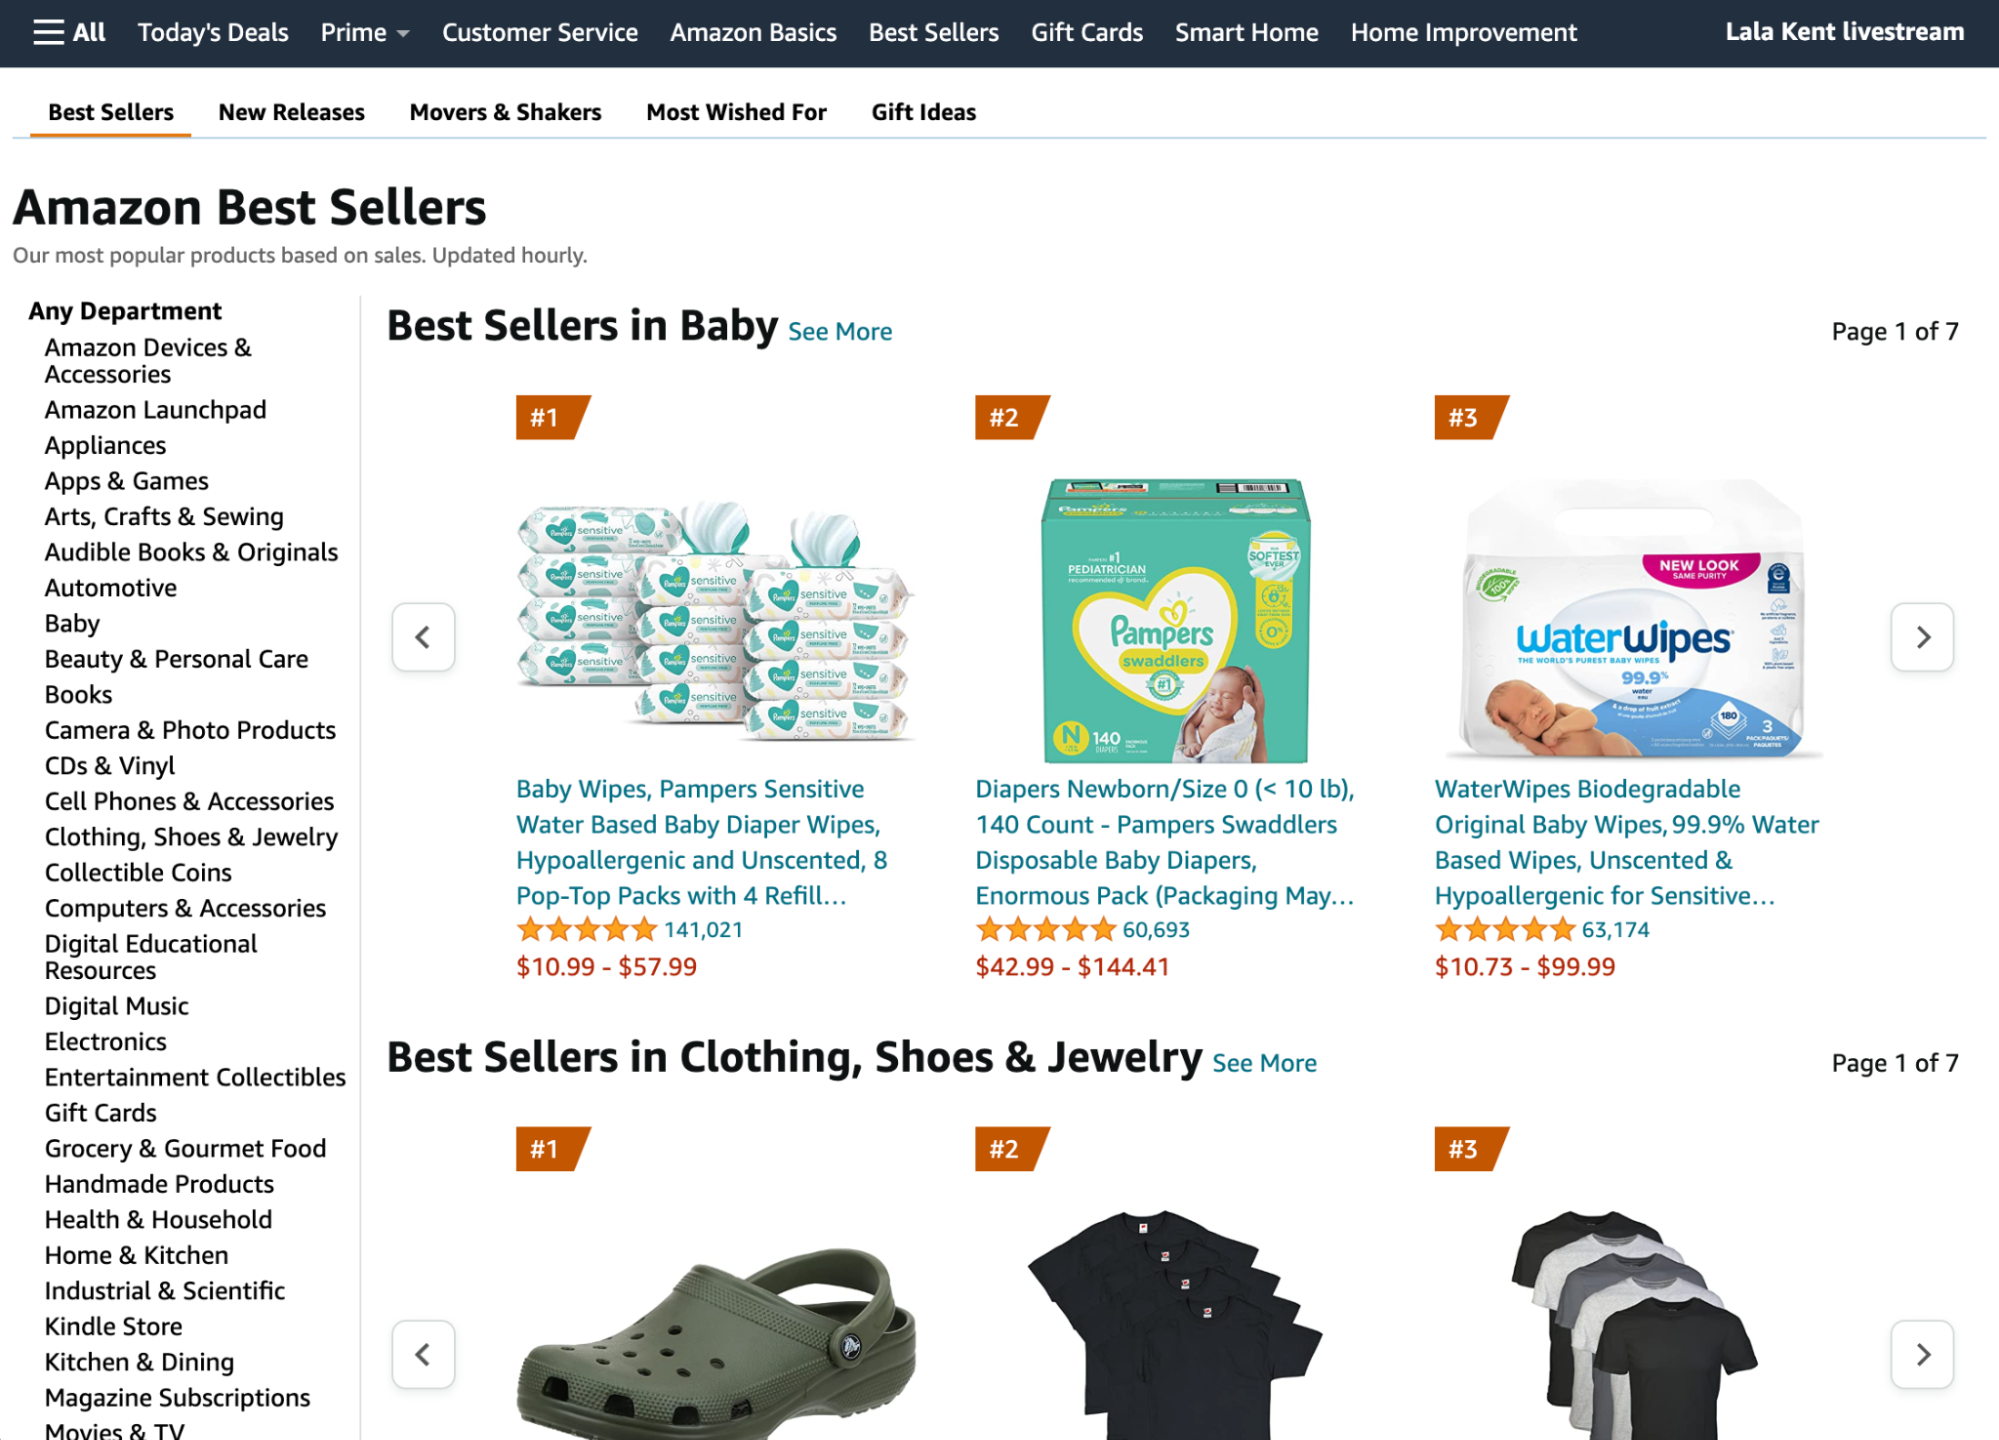 Amazon Best Sellers page showing the top-selling products in categories such as Baby and Clothing.